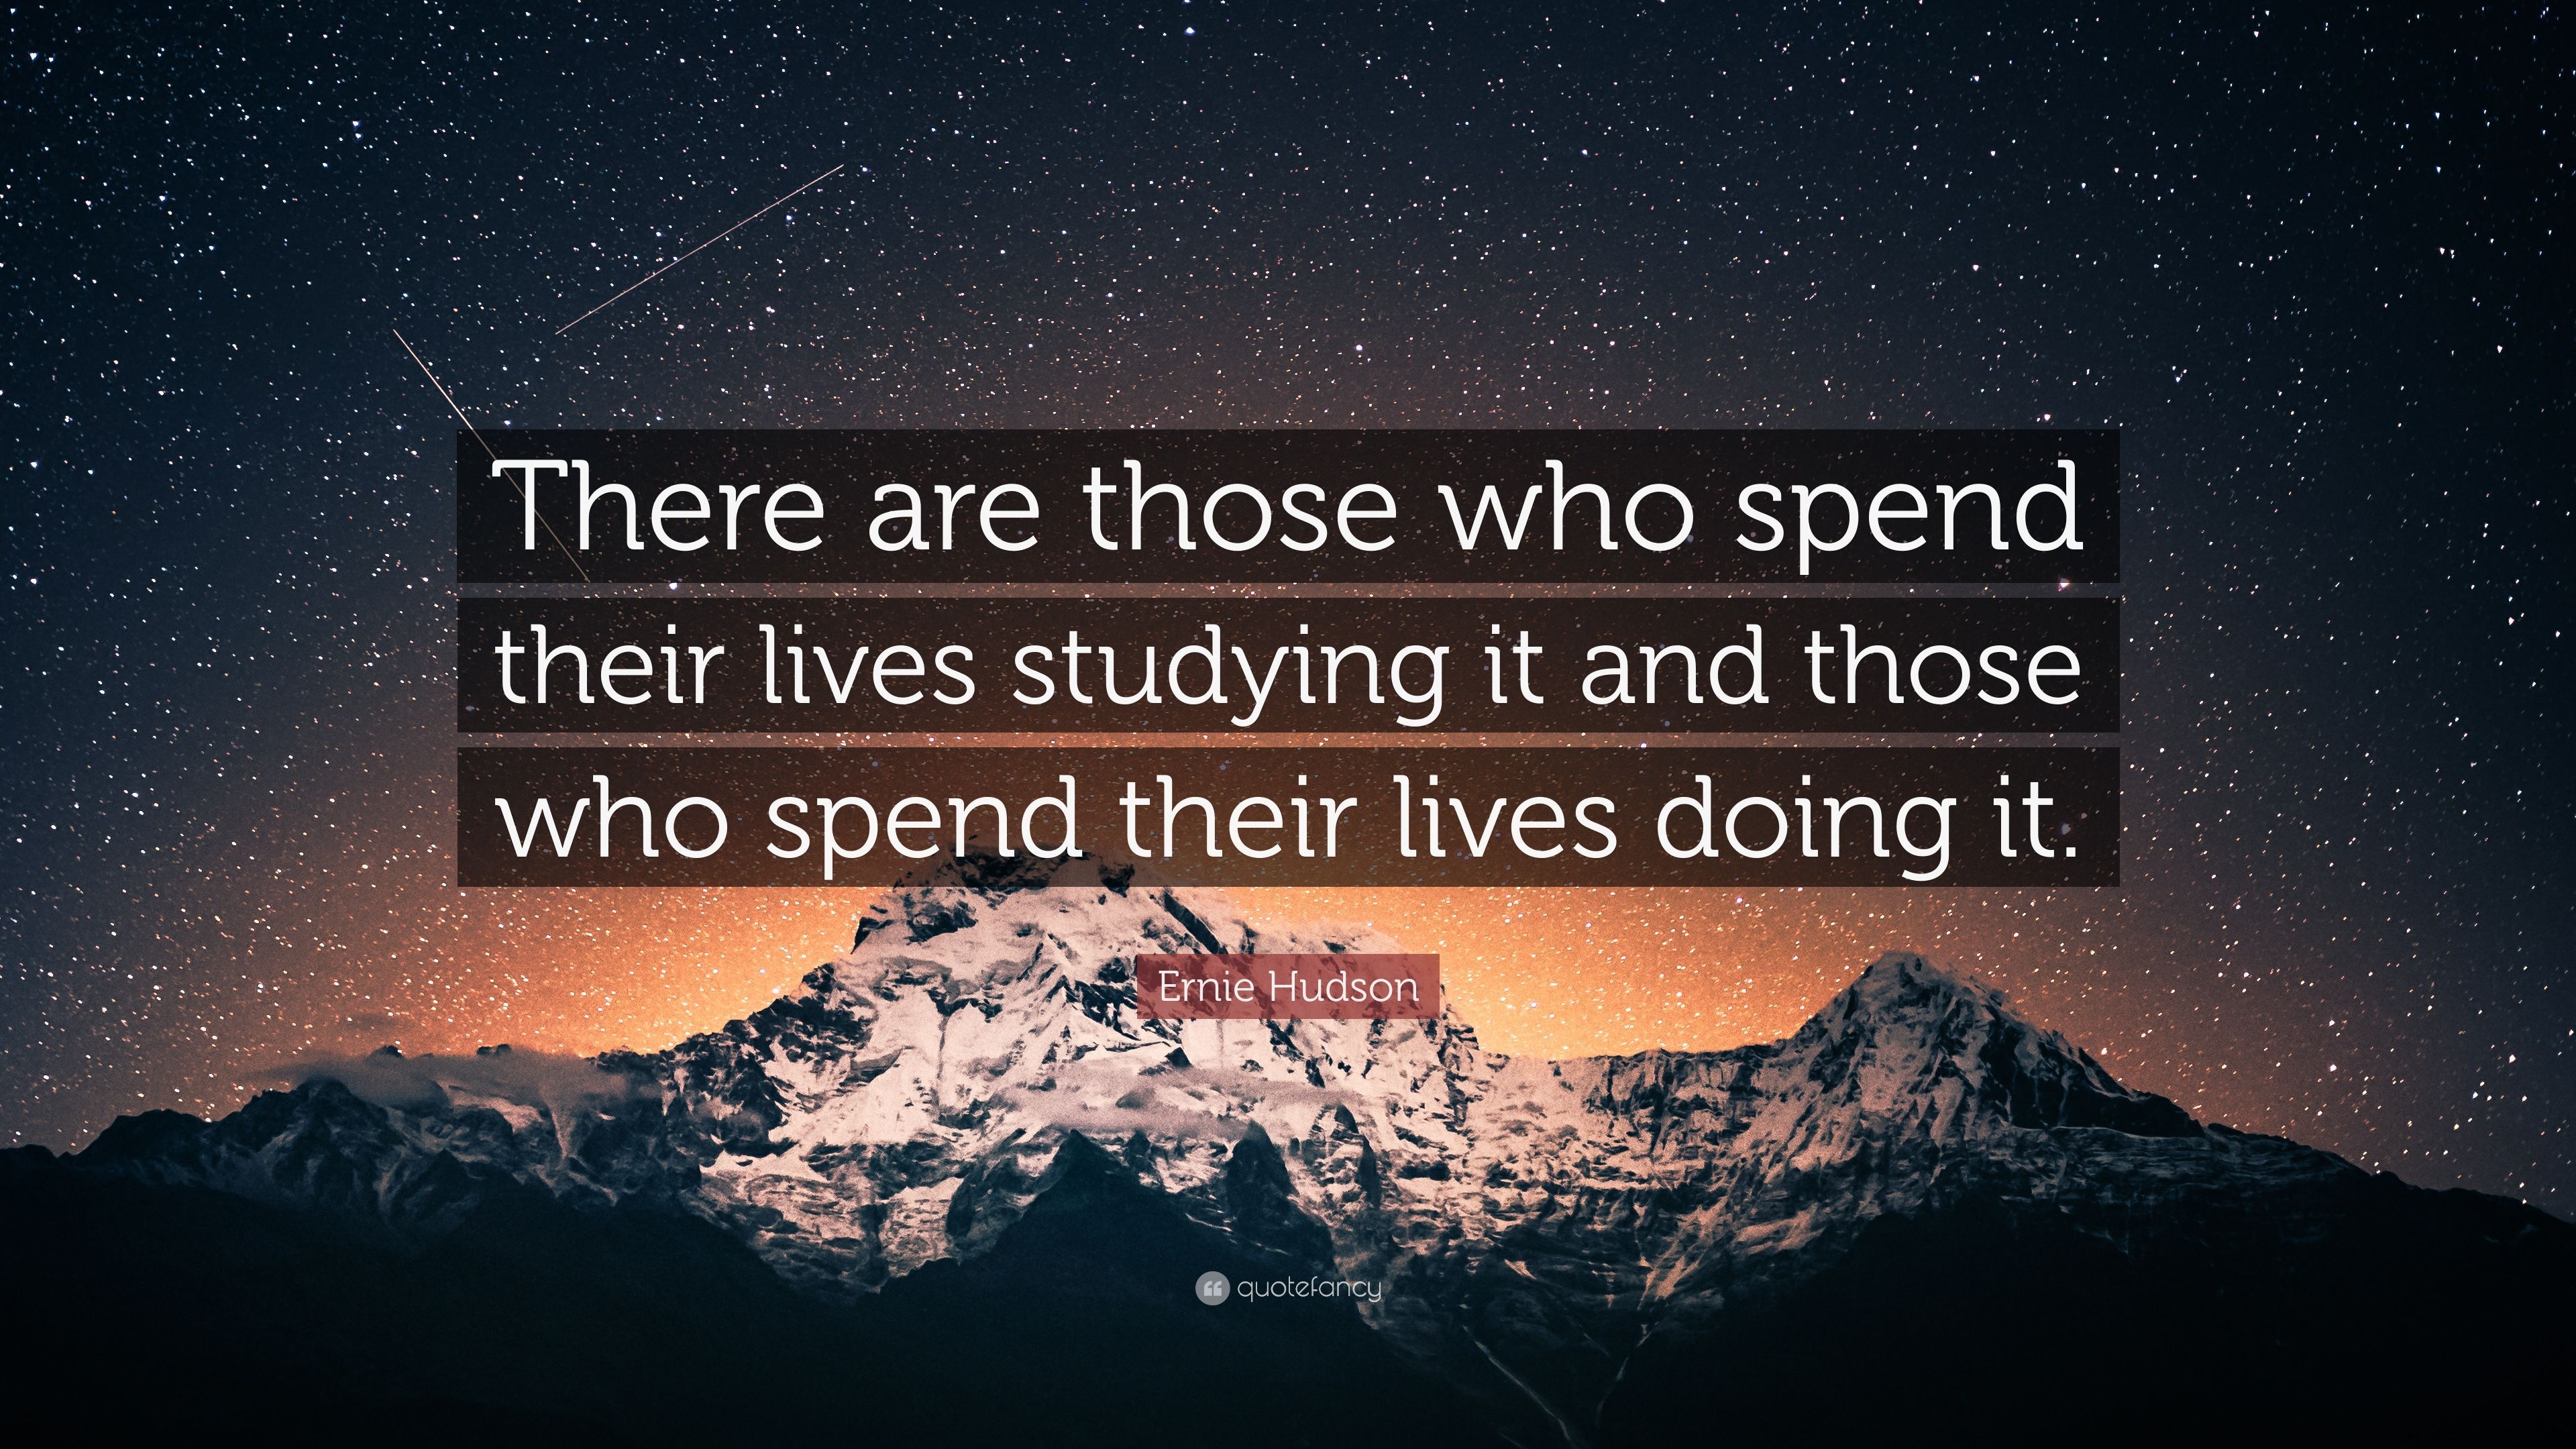 Ernie Hudson Quote: “There are those who spend their lives